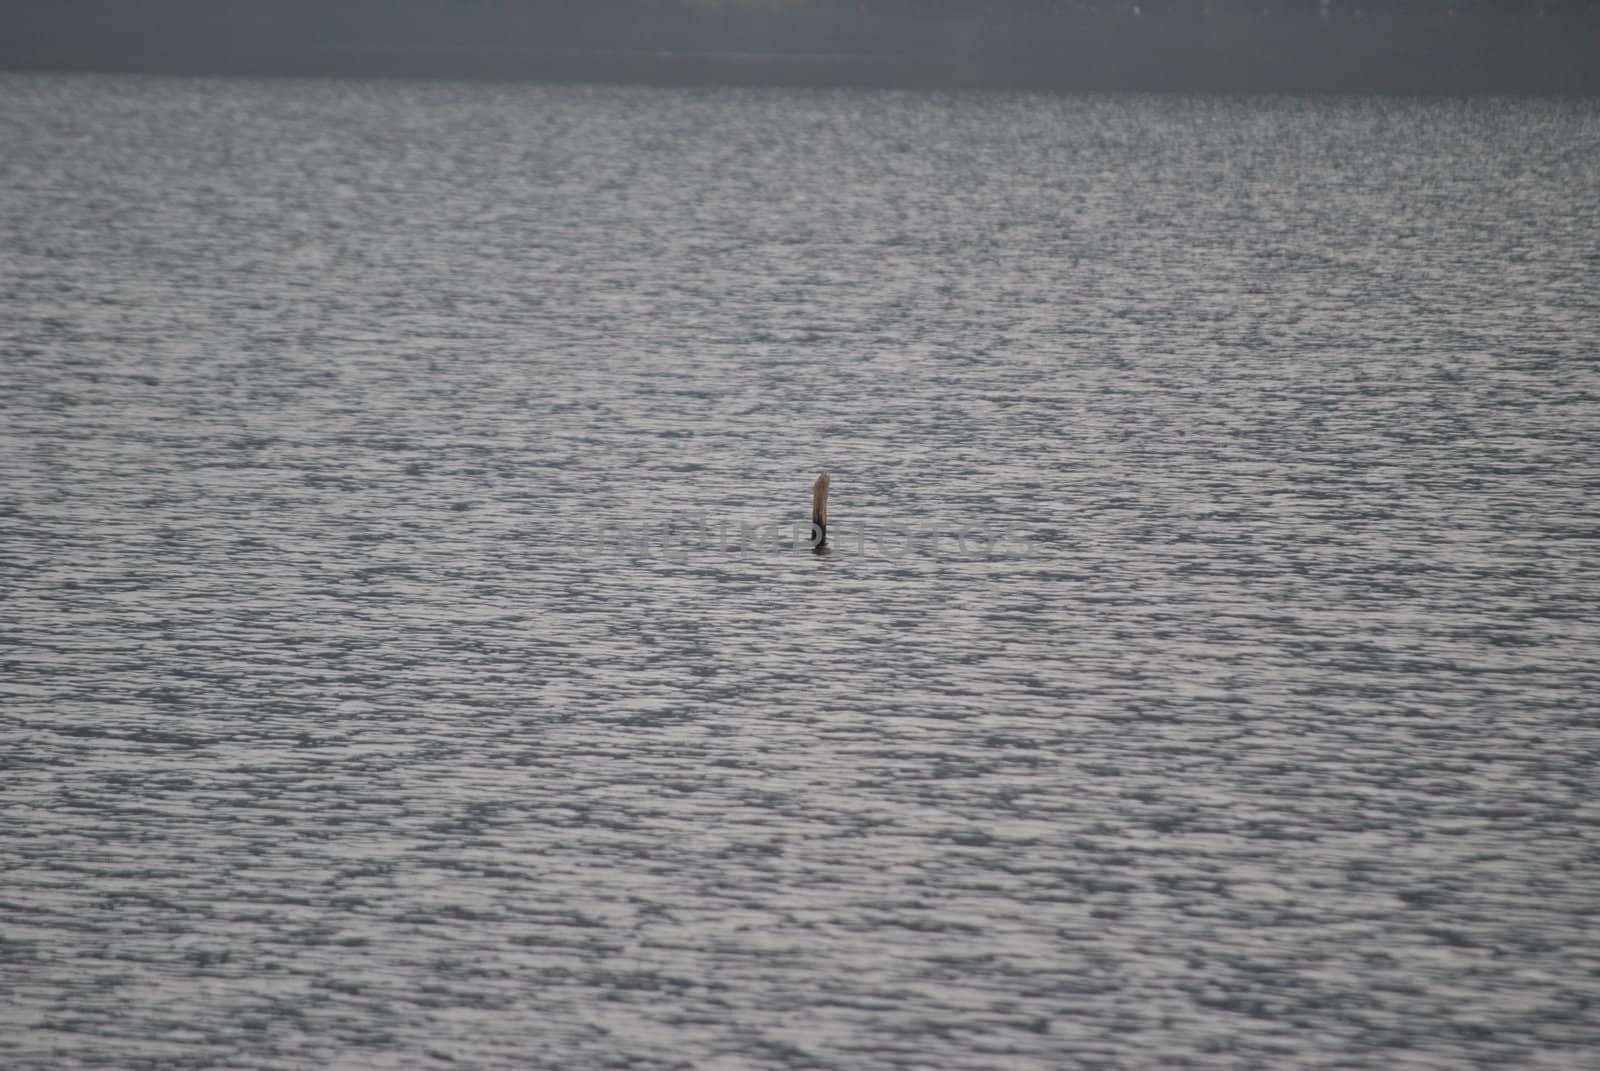 a strange object emerging from the waters of Lake Levio in the province of Trento